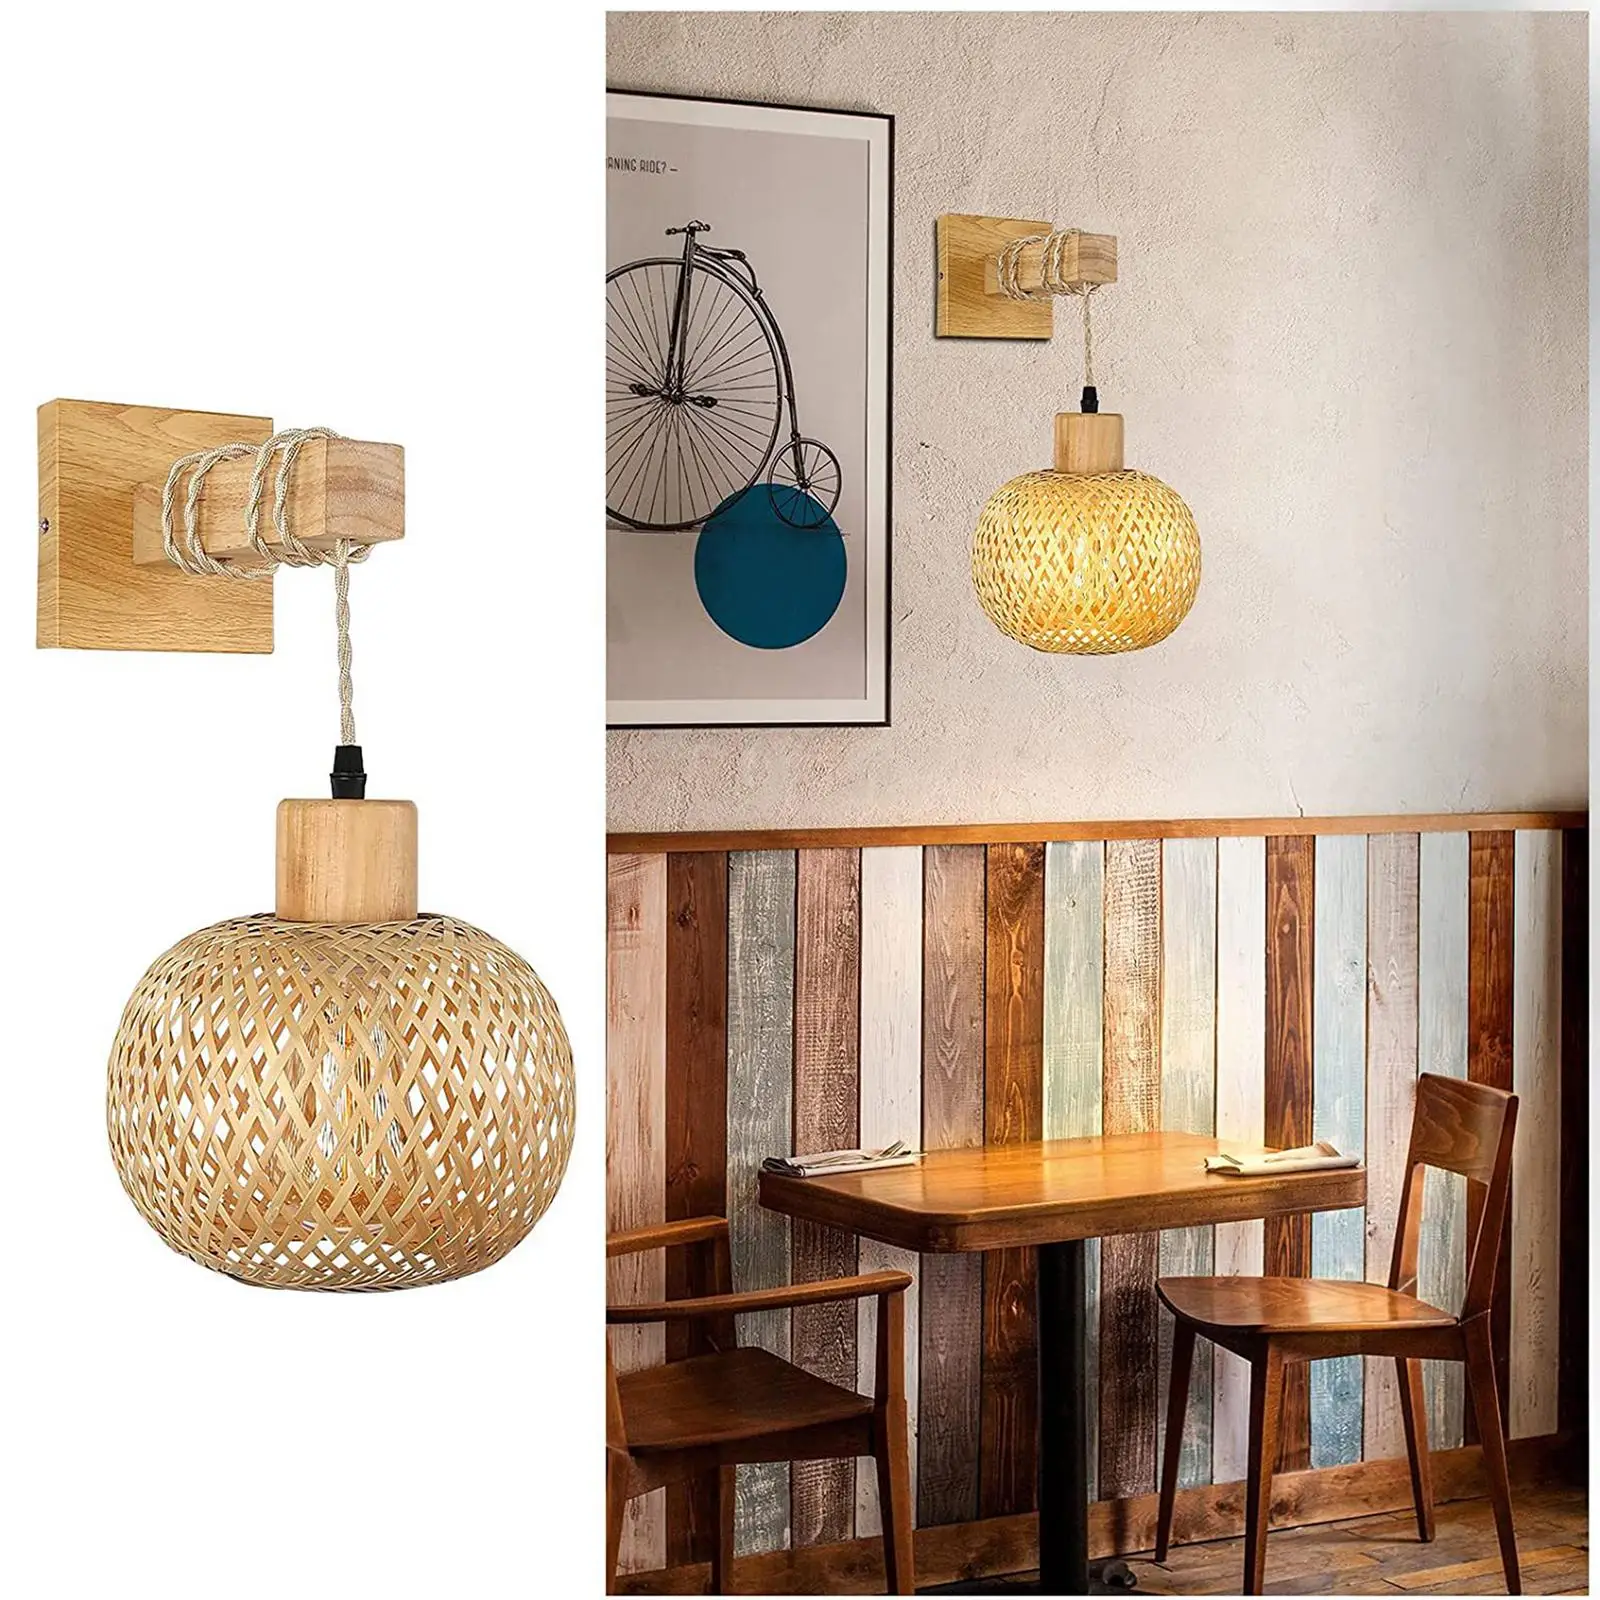 Rattan Wall Sconce Lighting, Rattan Lamps for Bedroom, Farmhouse Rustic Wall